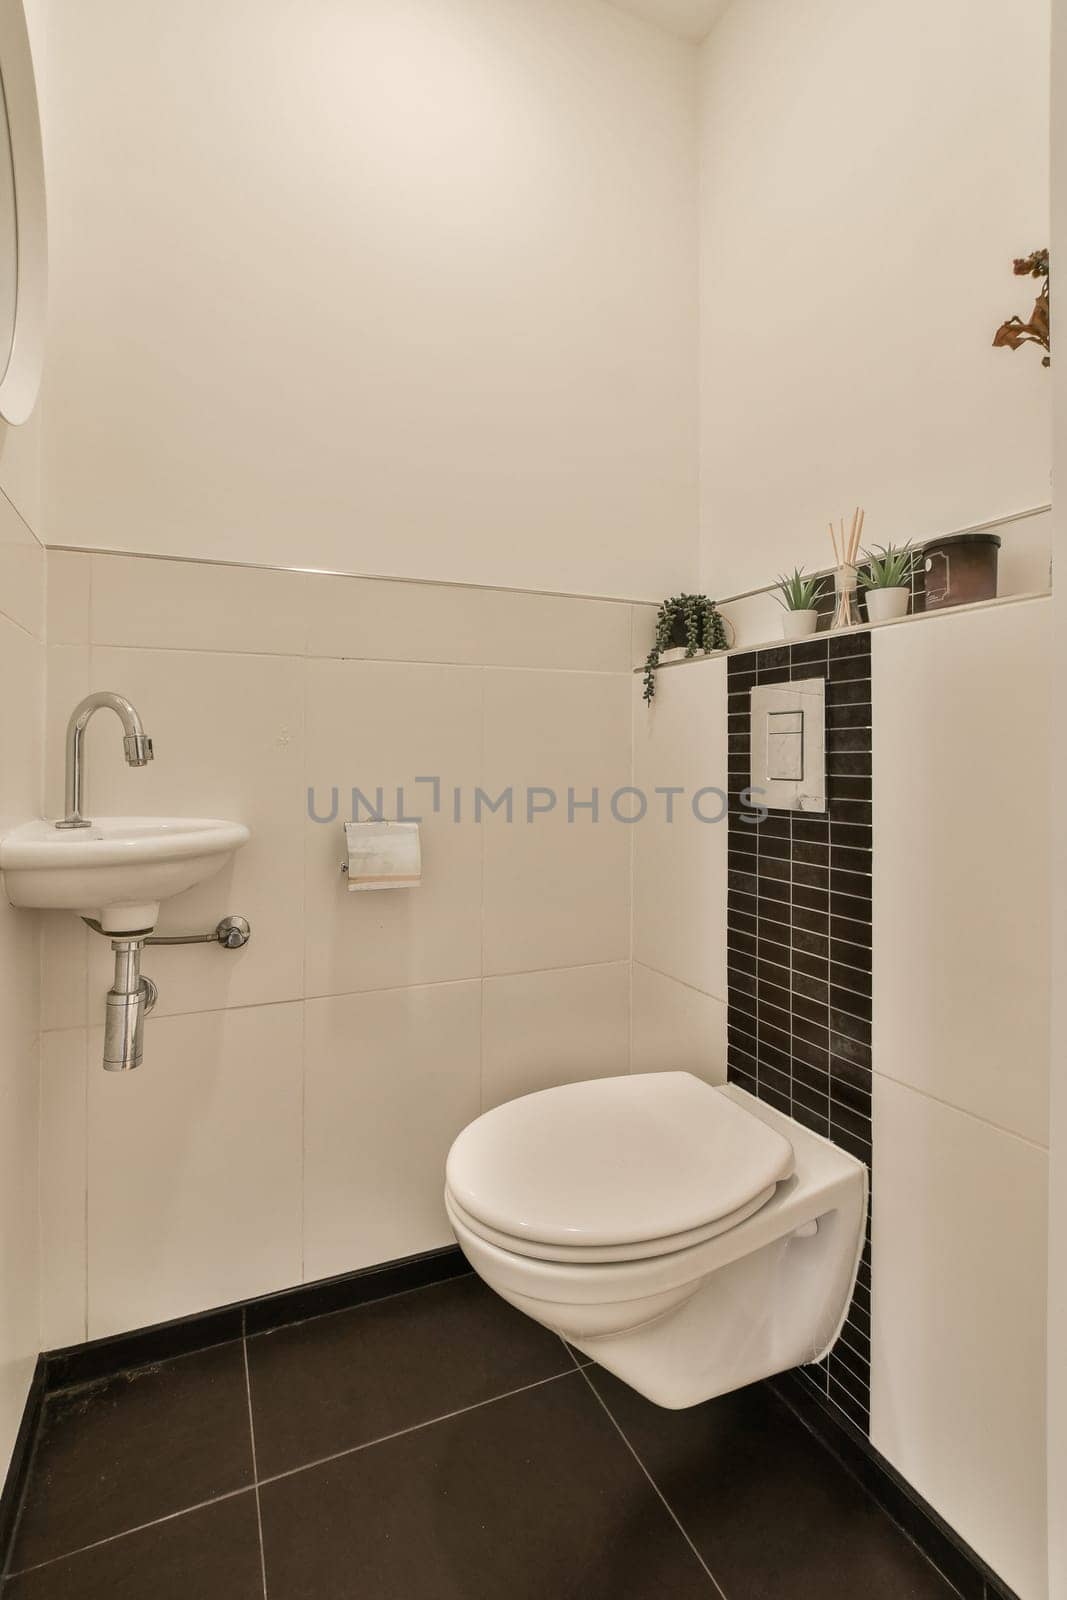 a white bathroom with black tile flooring and wall mounted toilet in the corner, there is a mirror on the wall